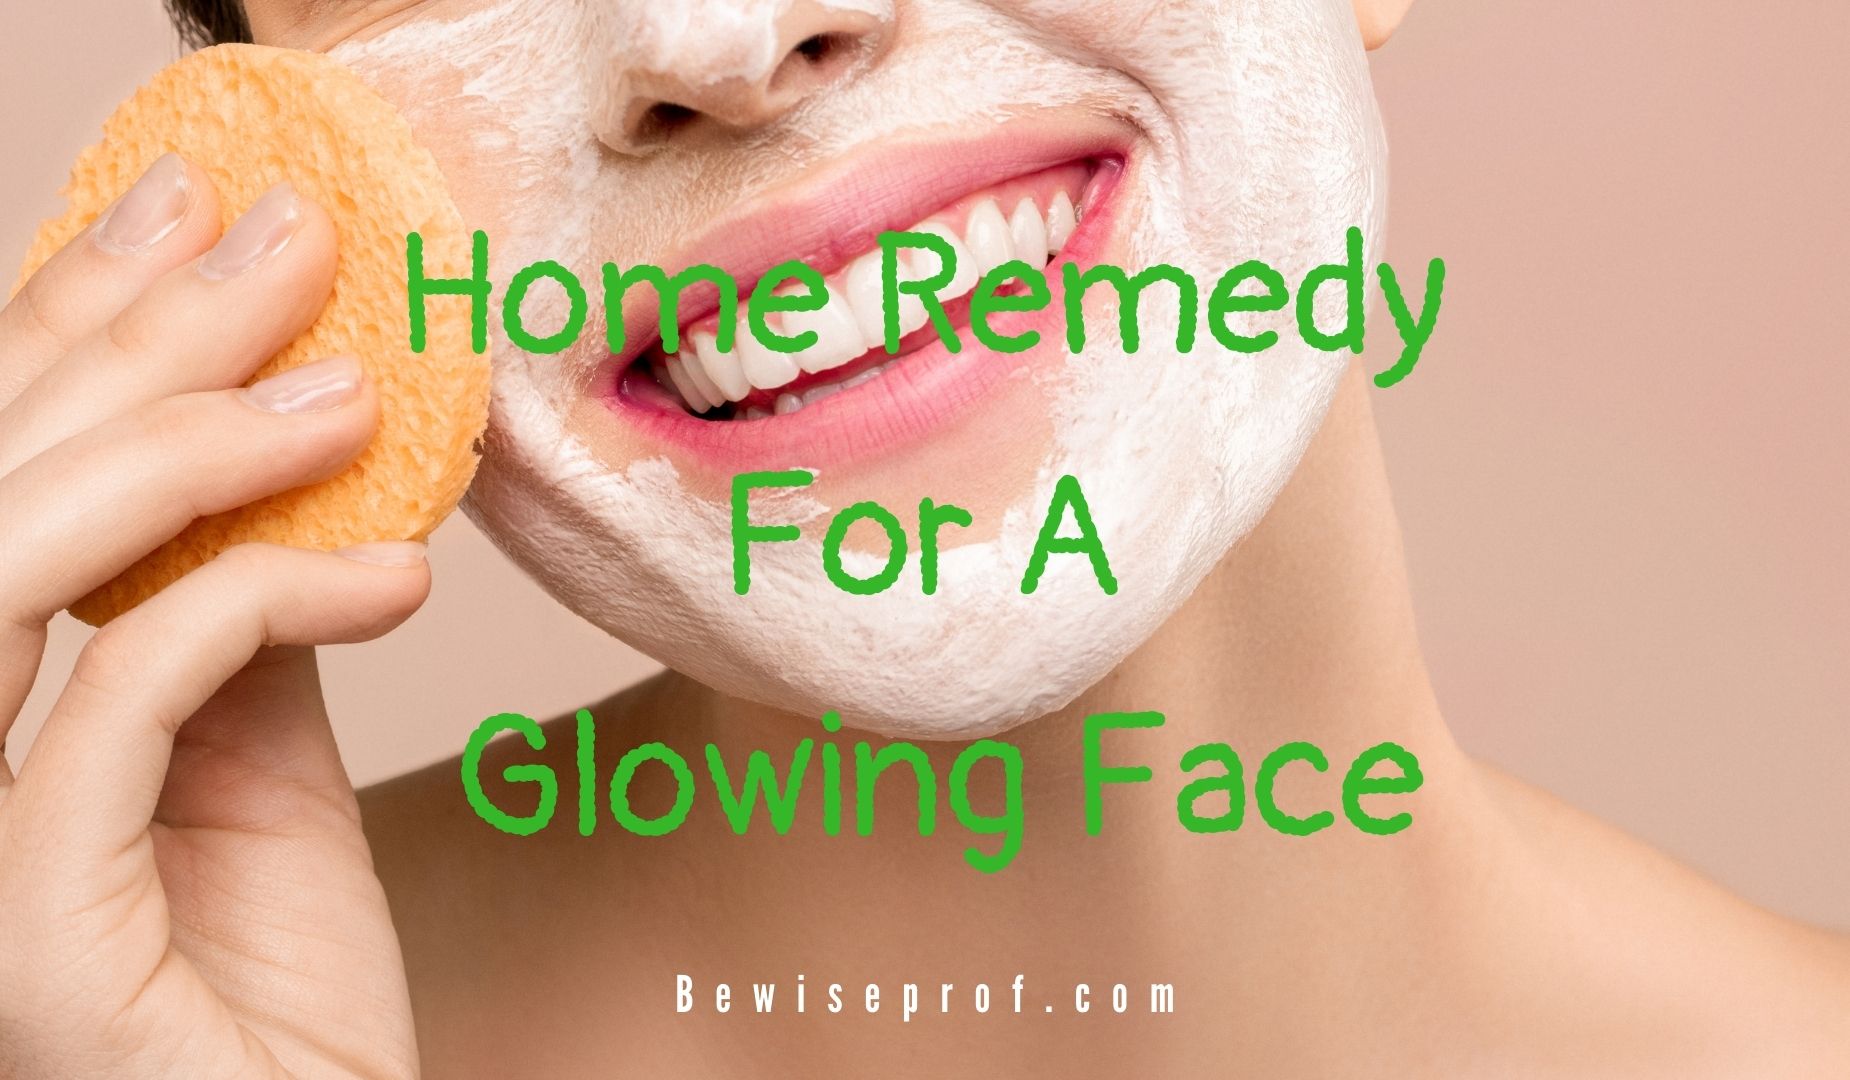 Home Remedy For A Glowing Face